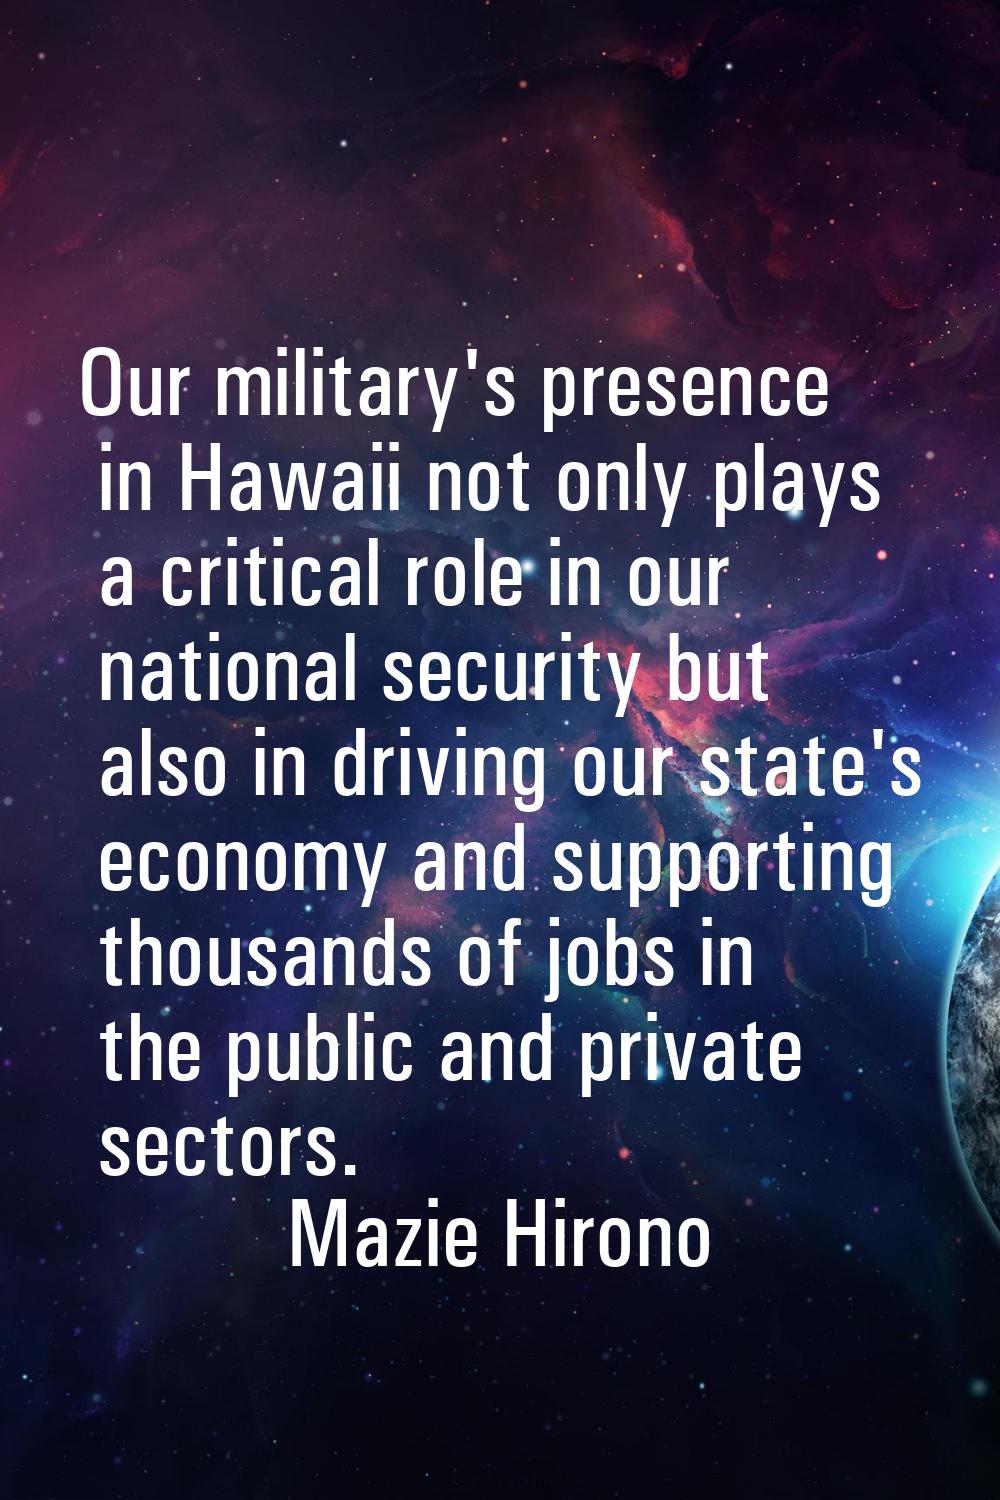 Our military's presence in Hawaii not only plays a critical role in our national security but also 